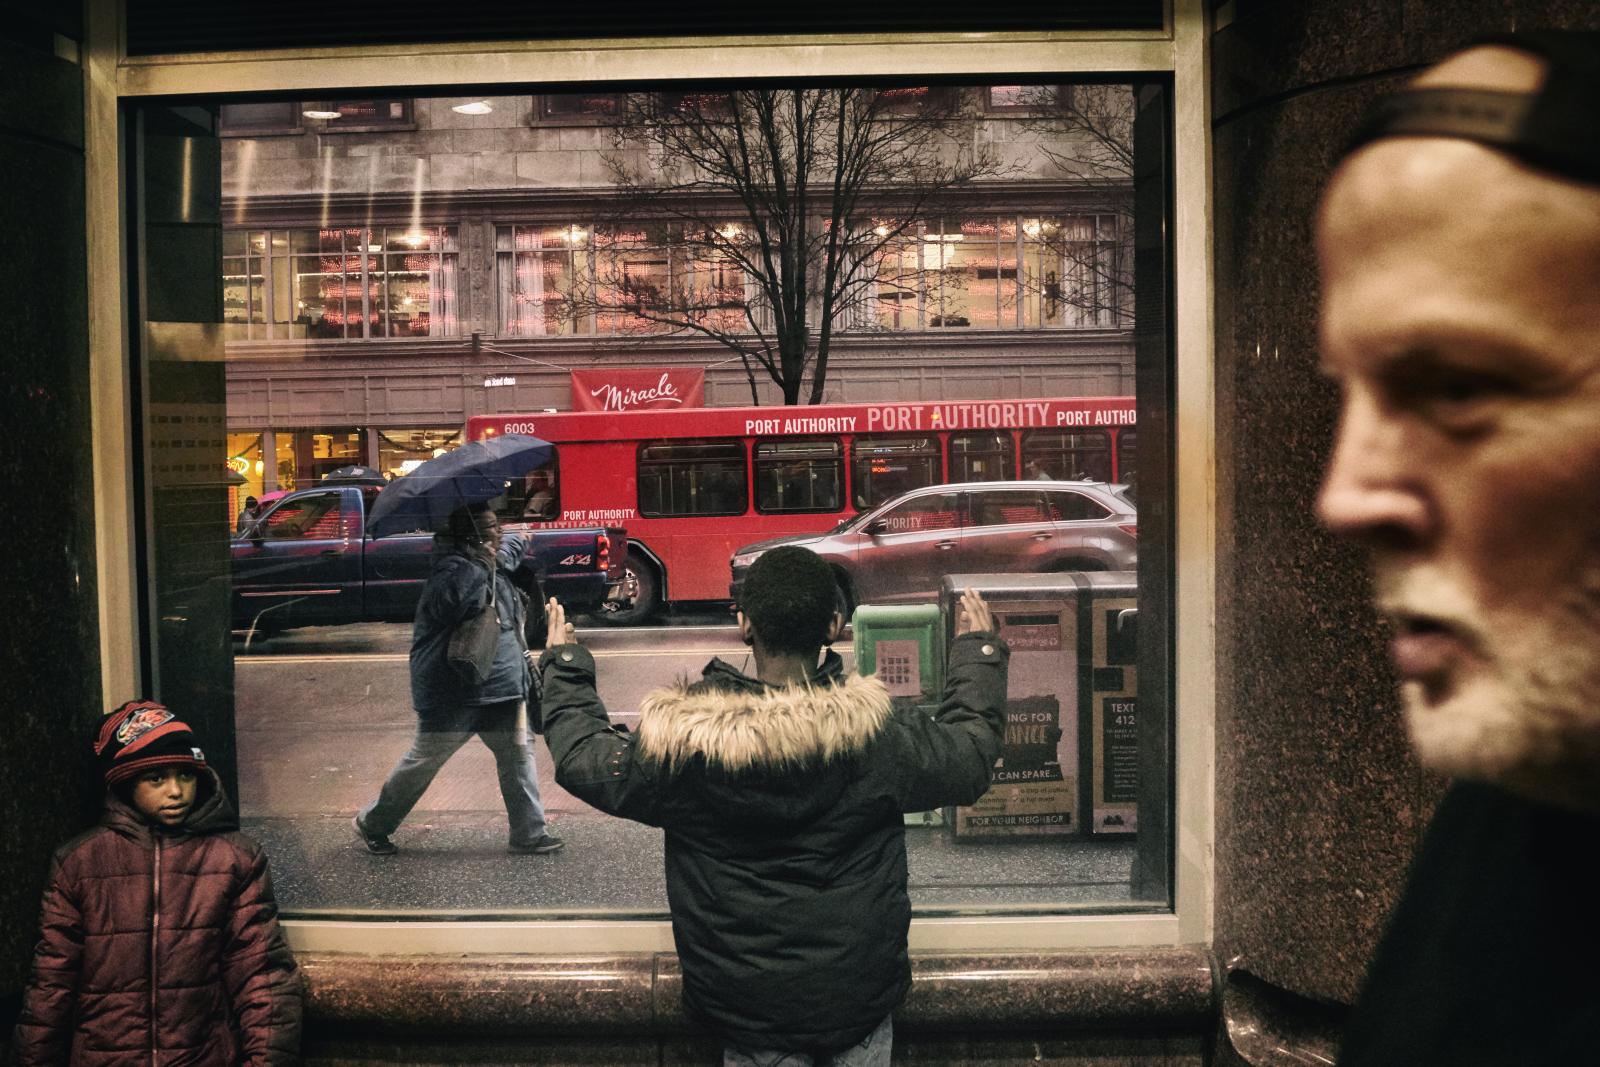 Bus Stop | Buy this image